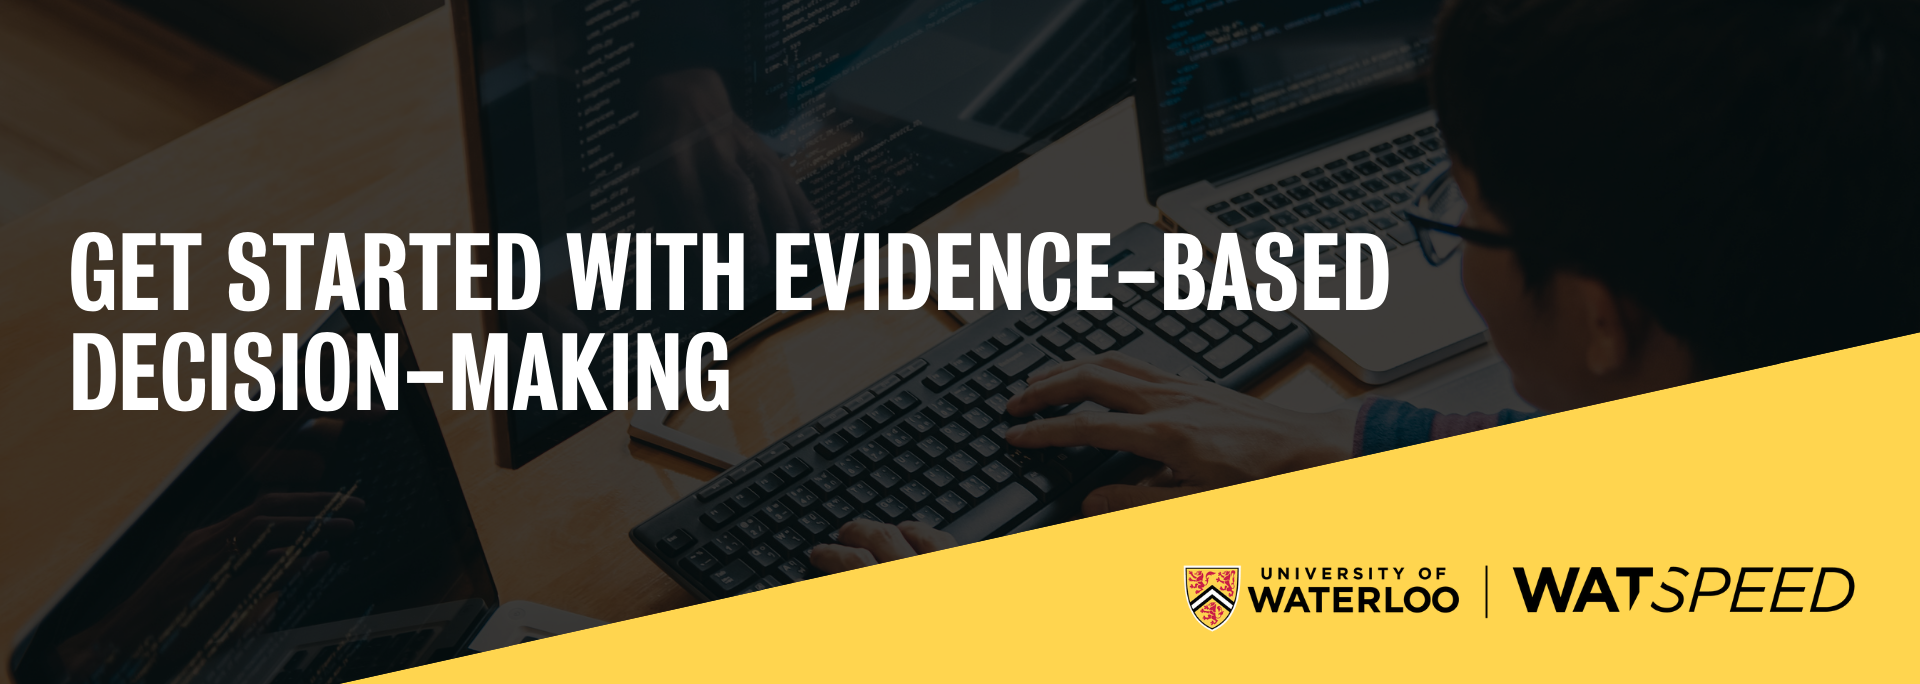 Get started with evidence-based decision-making